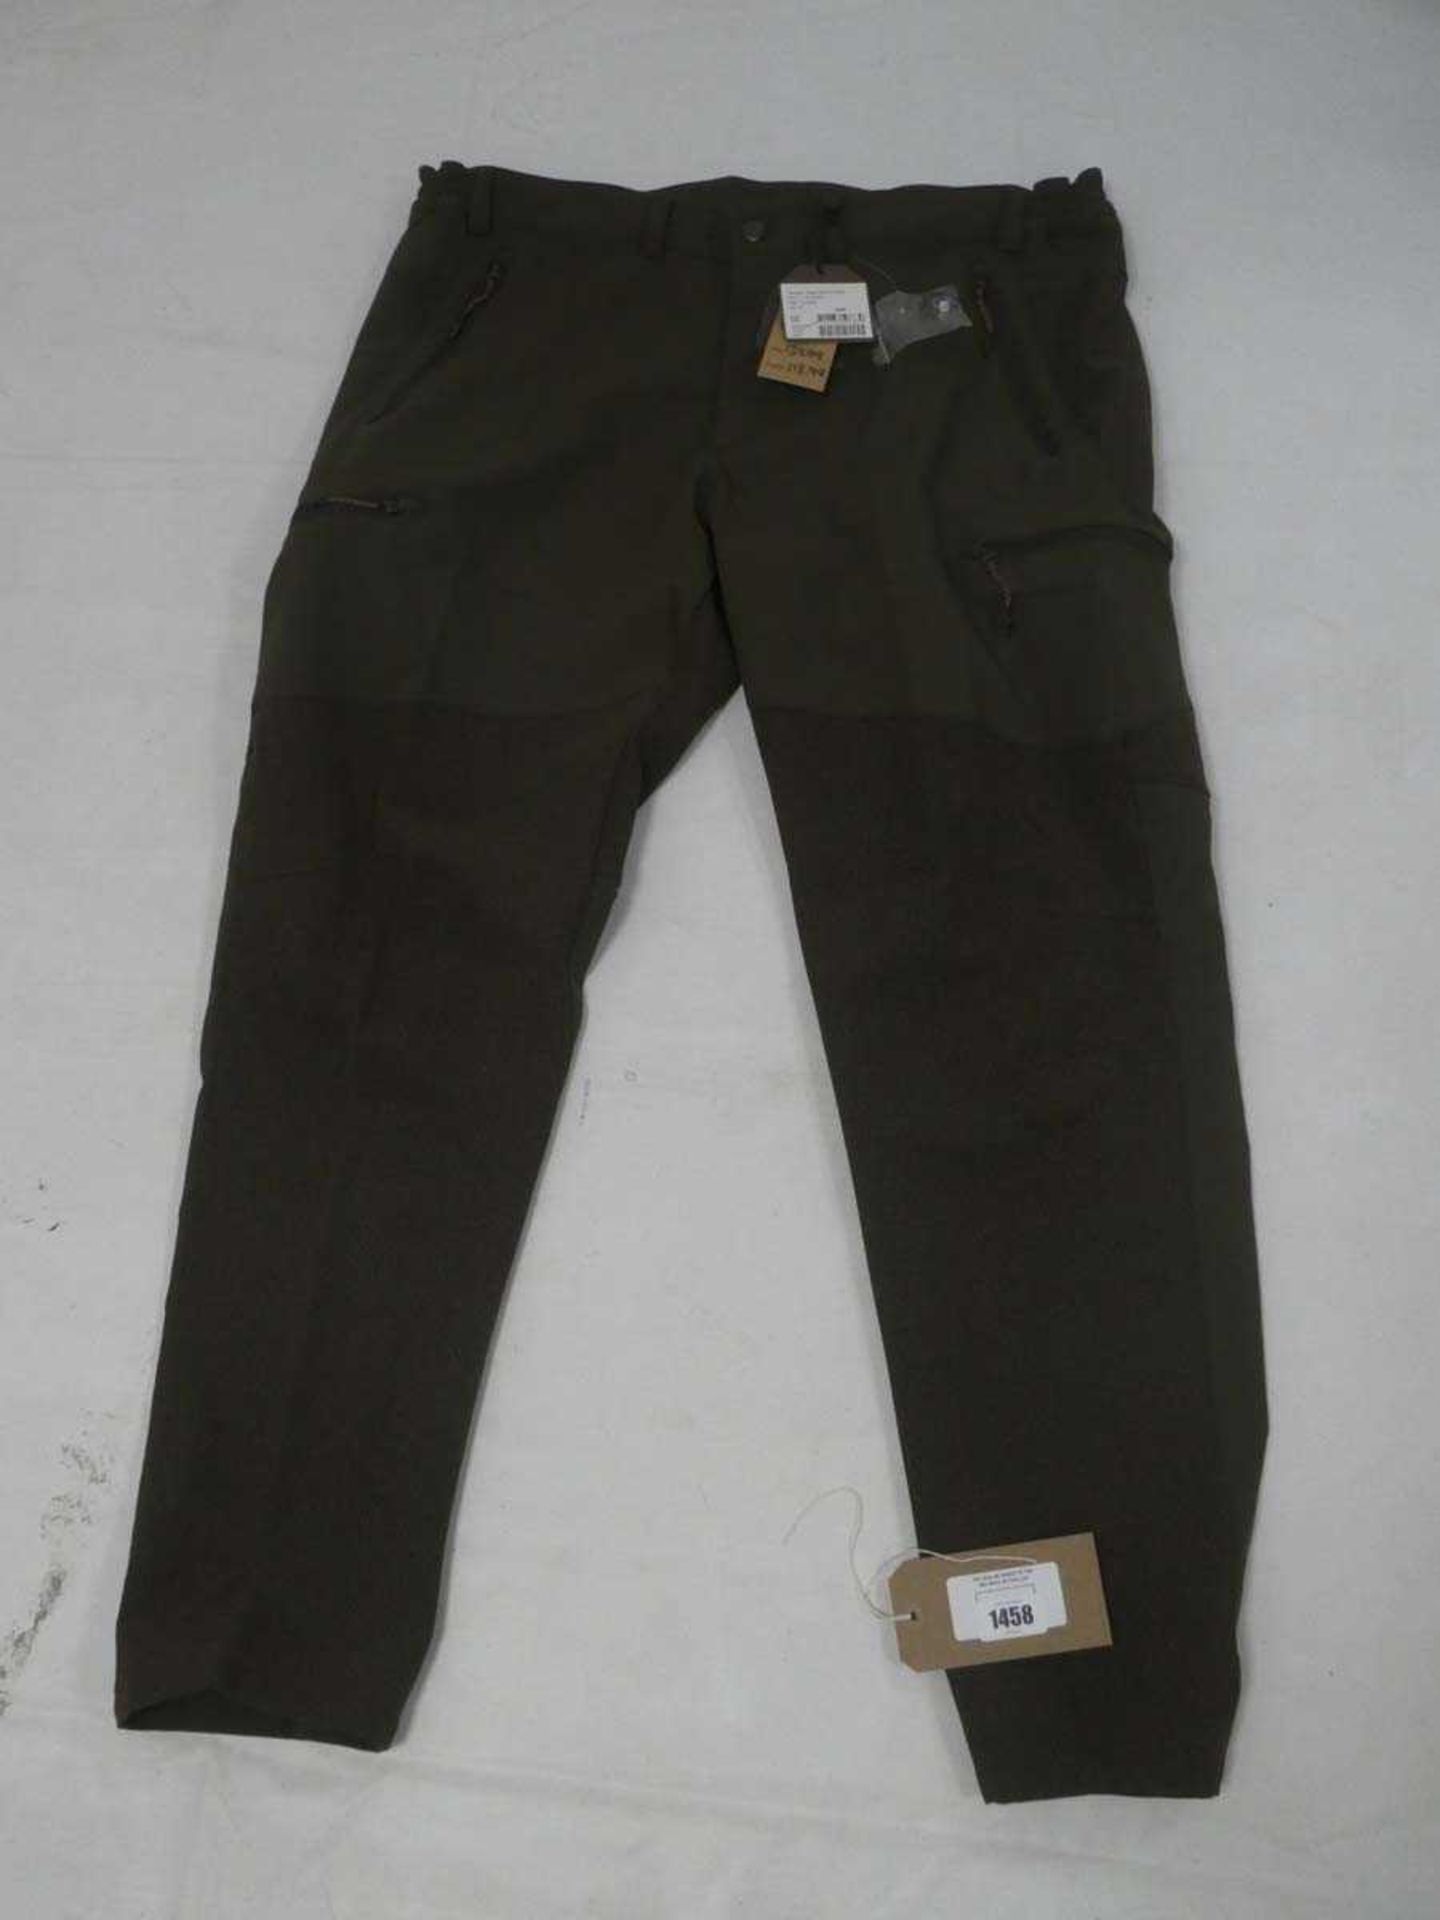 +VAT Seeland hunting gear outdoor reinforced trousers size 58